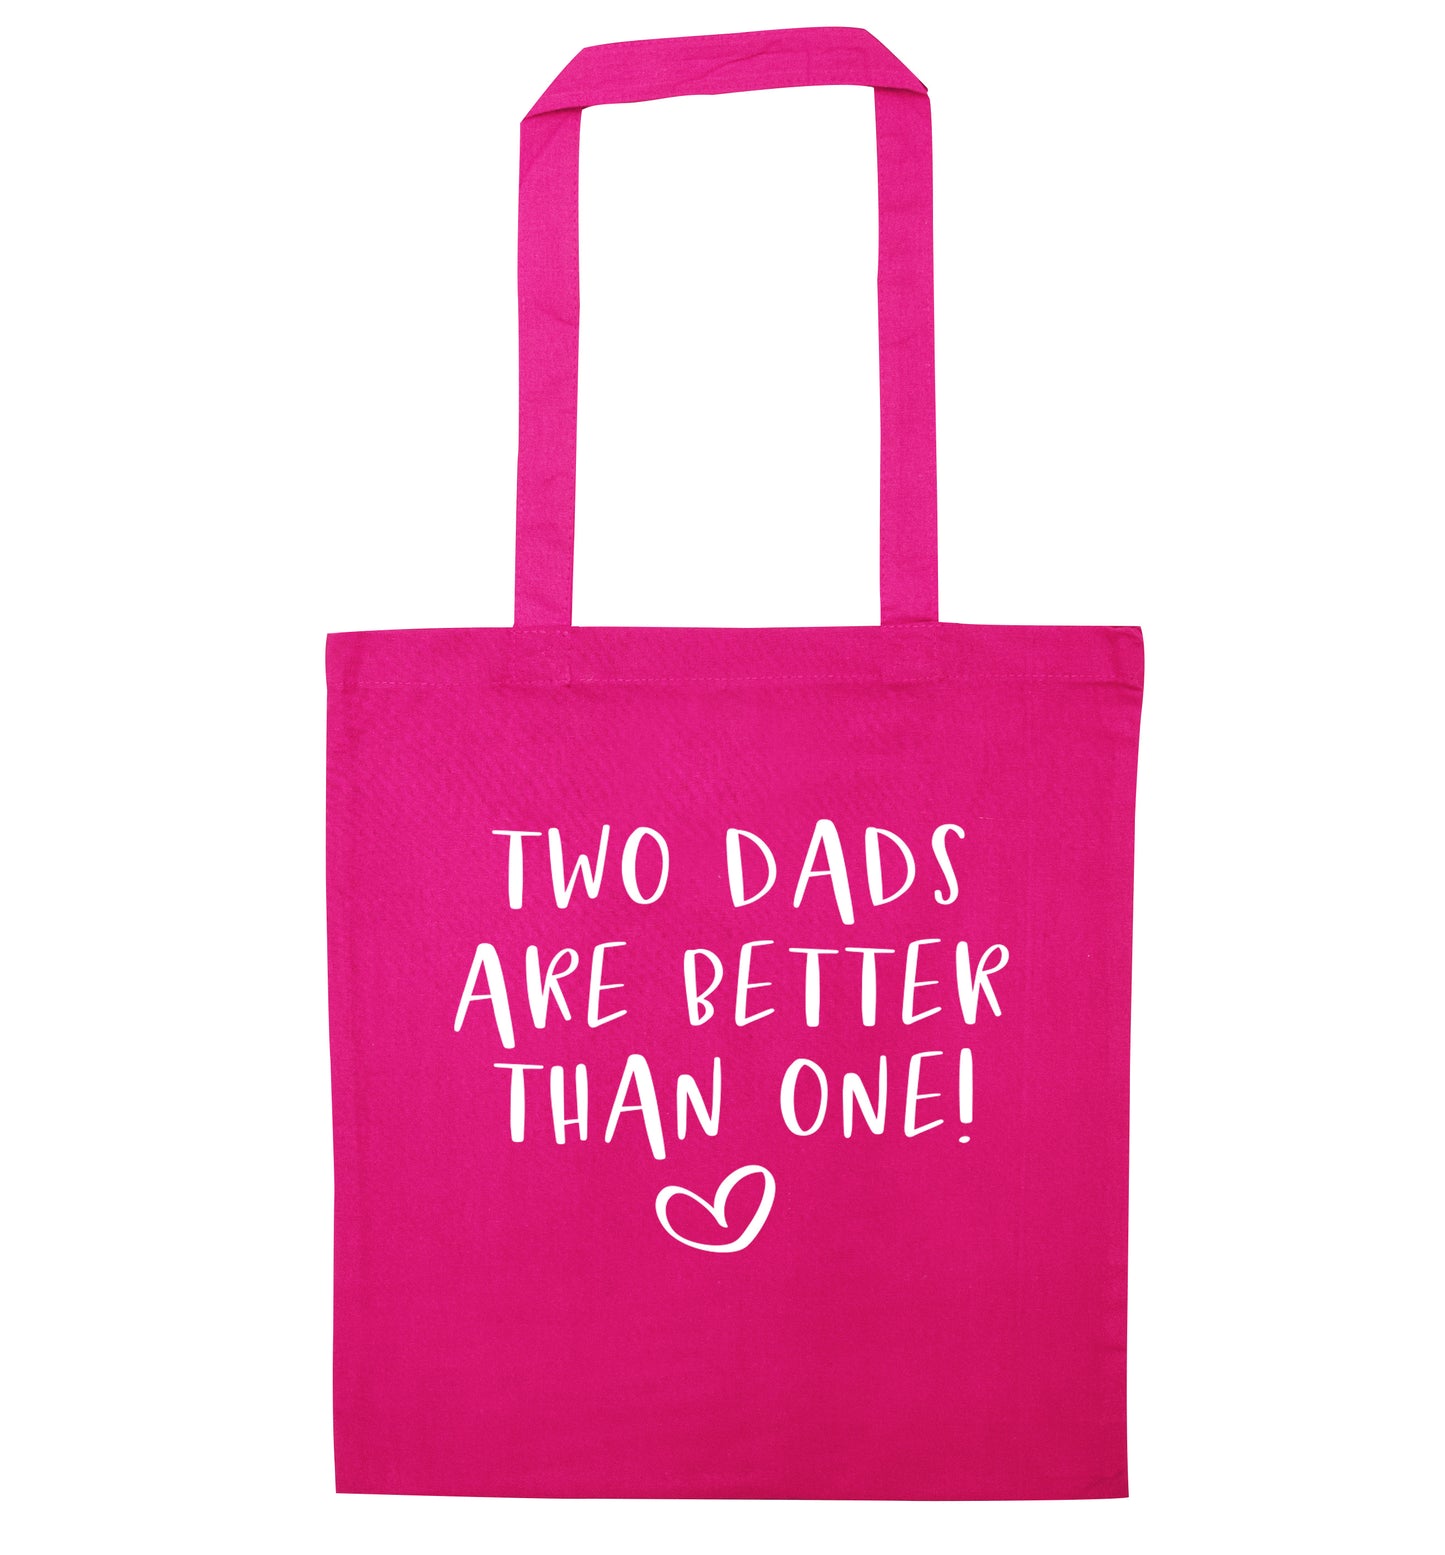 Two dads are better than one pink tote bag